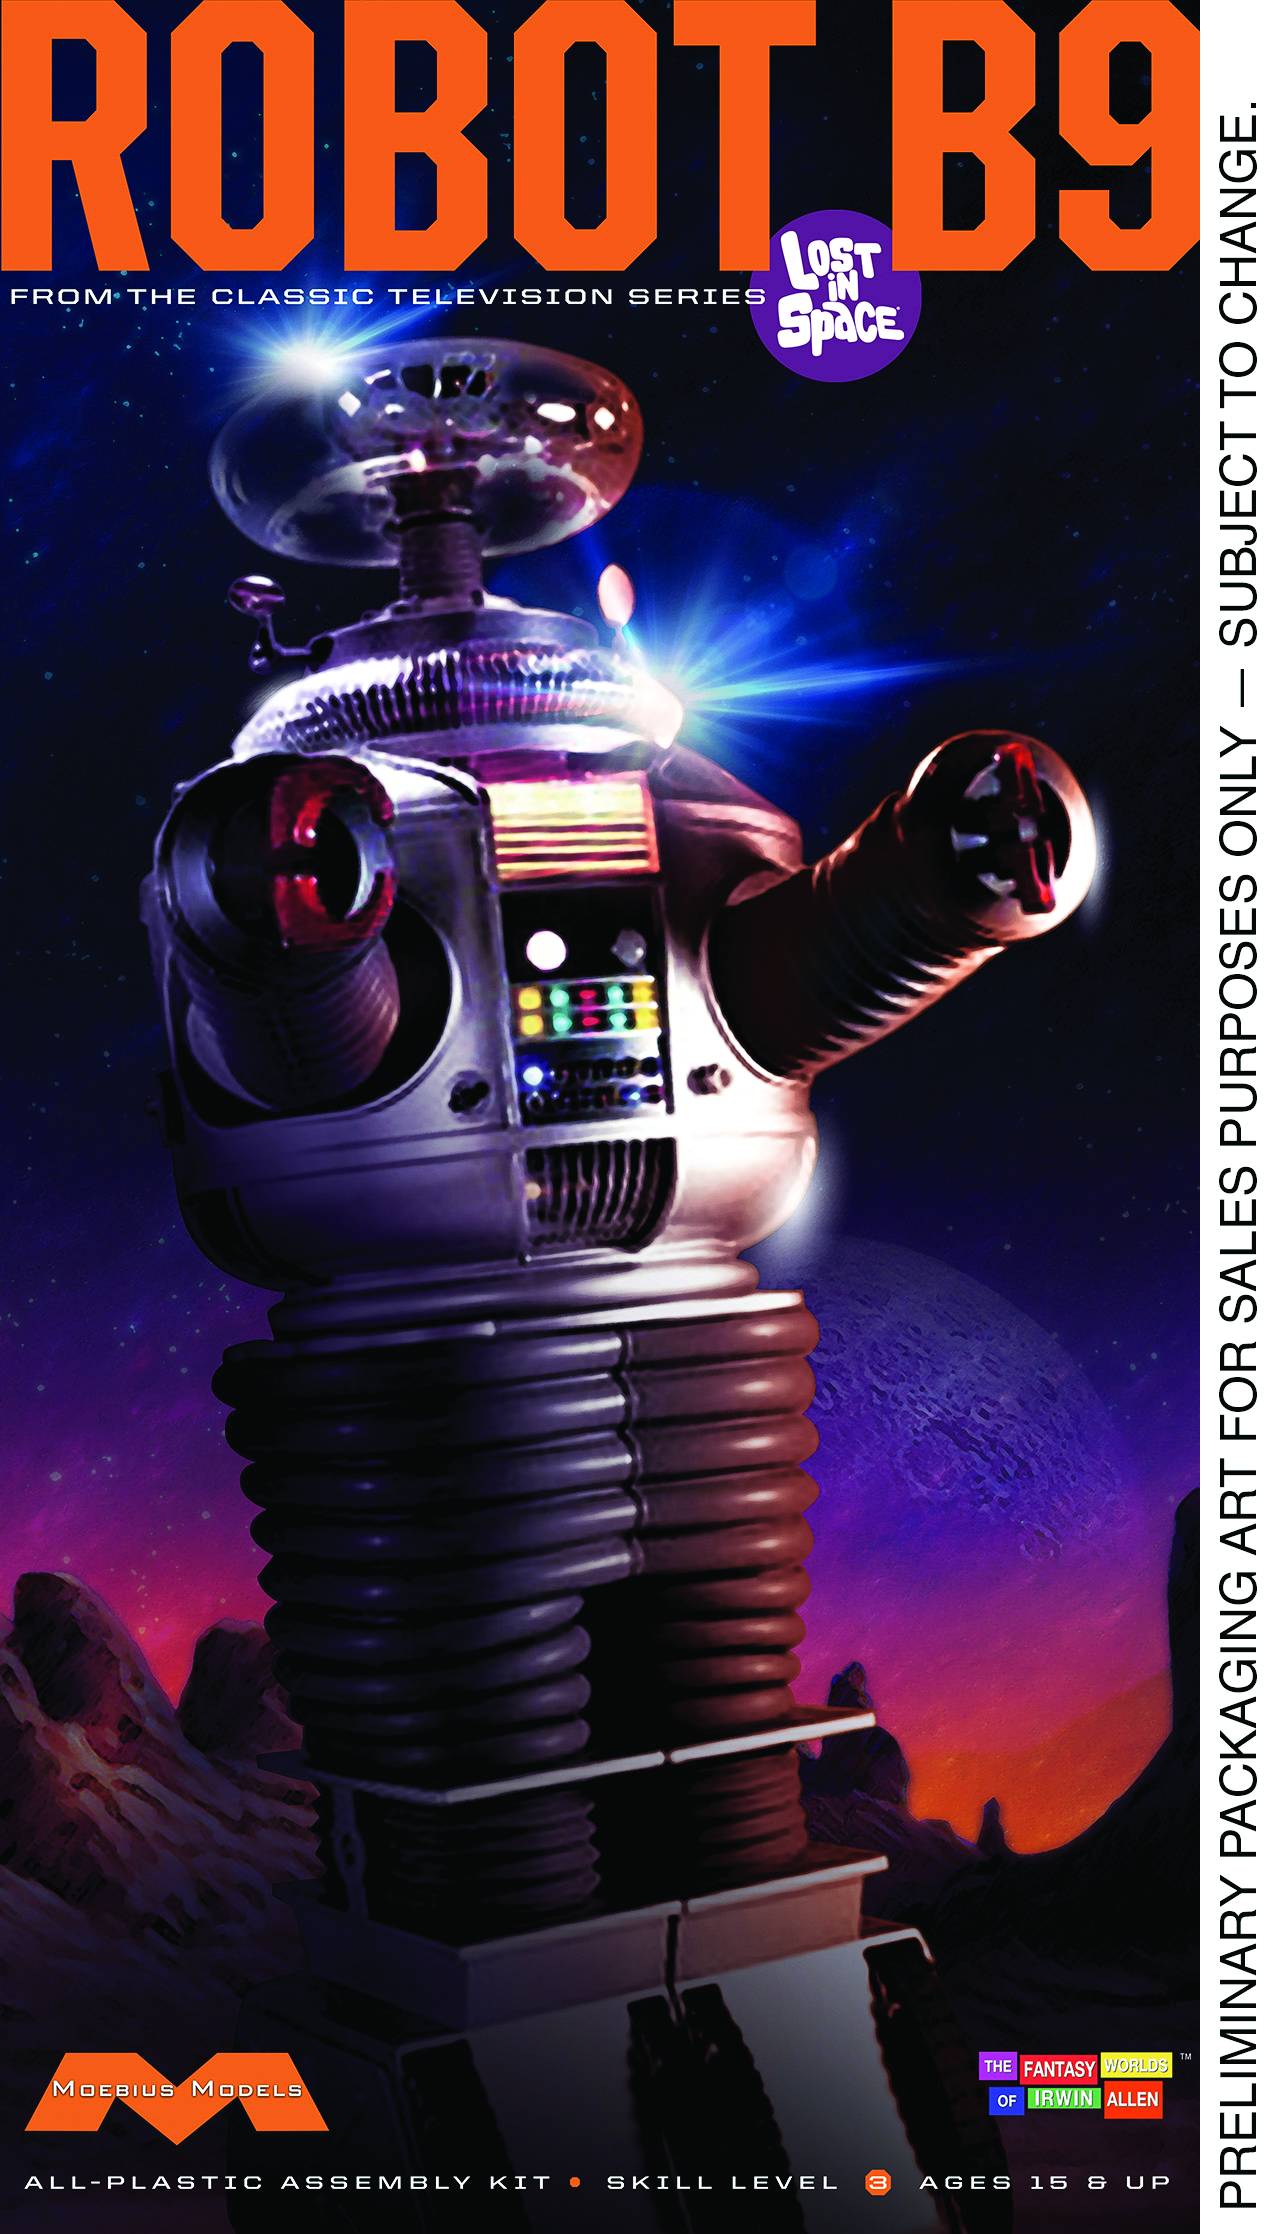 lost in space movie robot